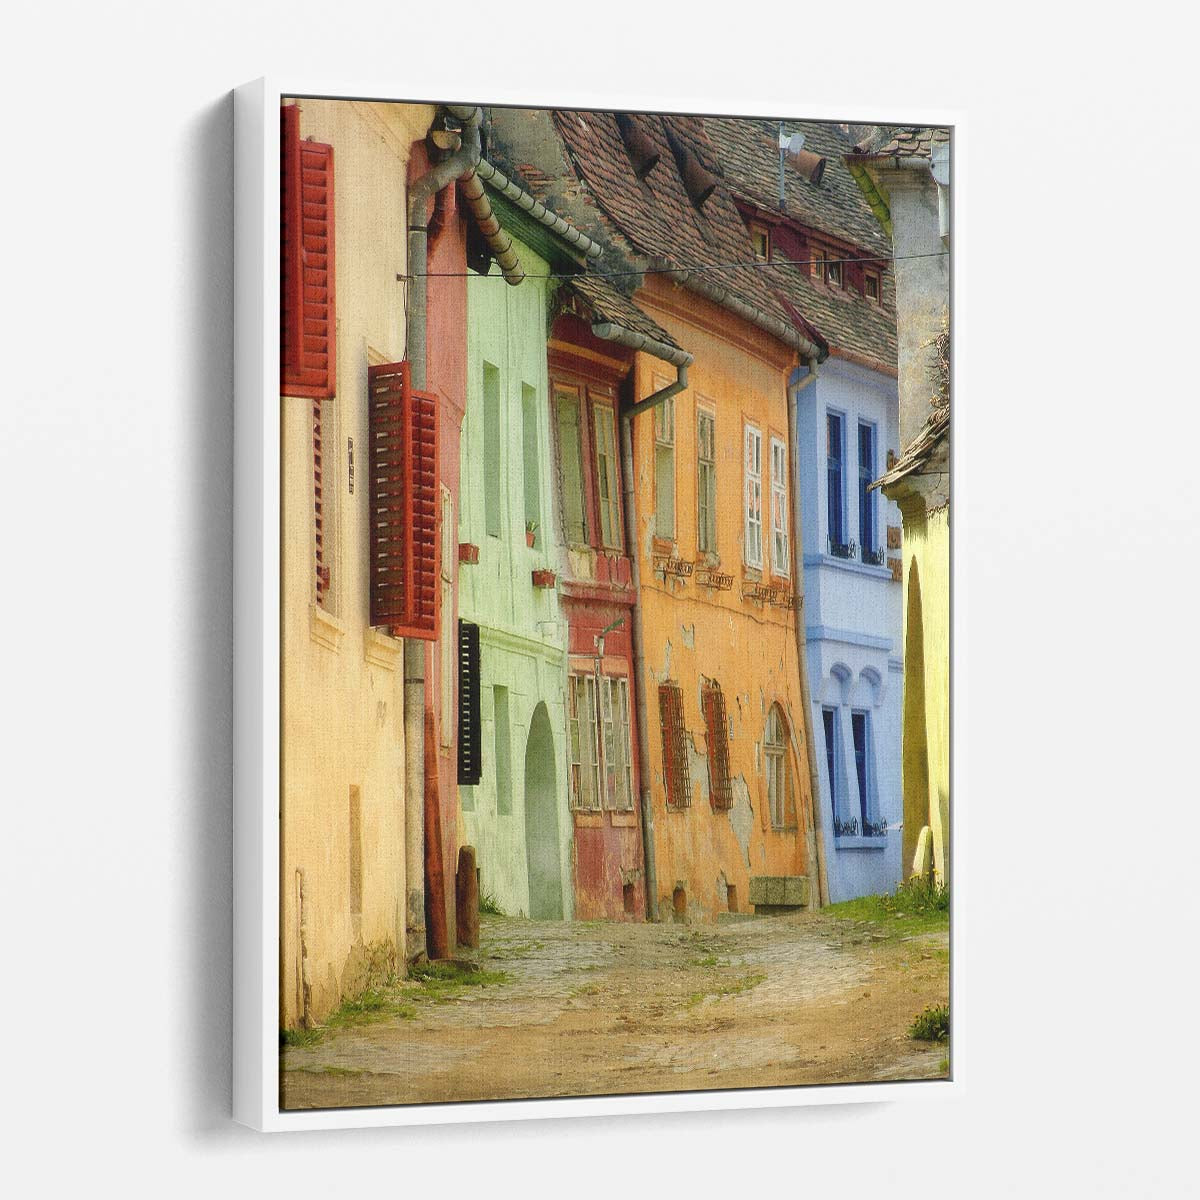 Colorful Sighisoara Old Town Architecture Photography Wall Art by Luxuriance Designs, made in USA